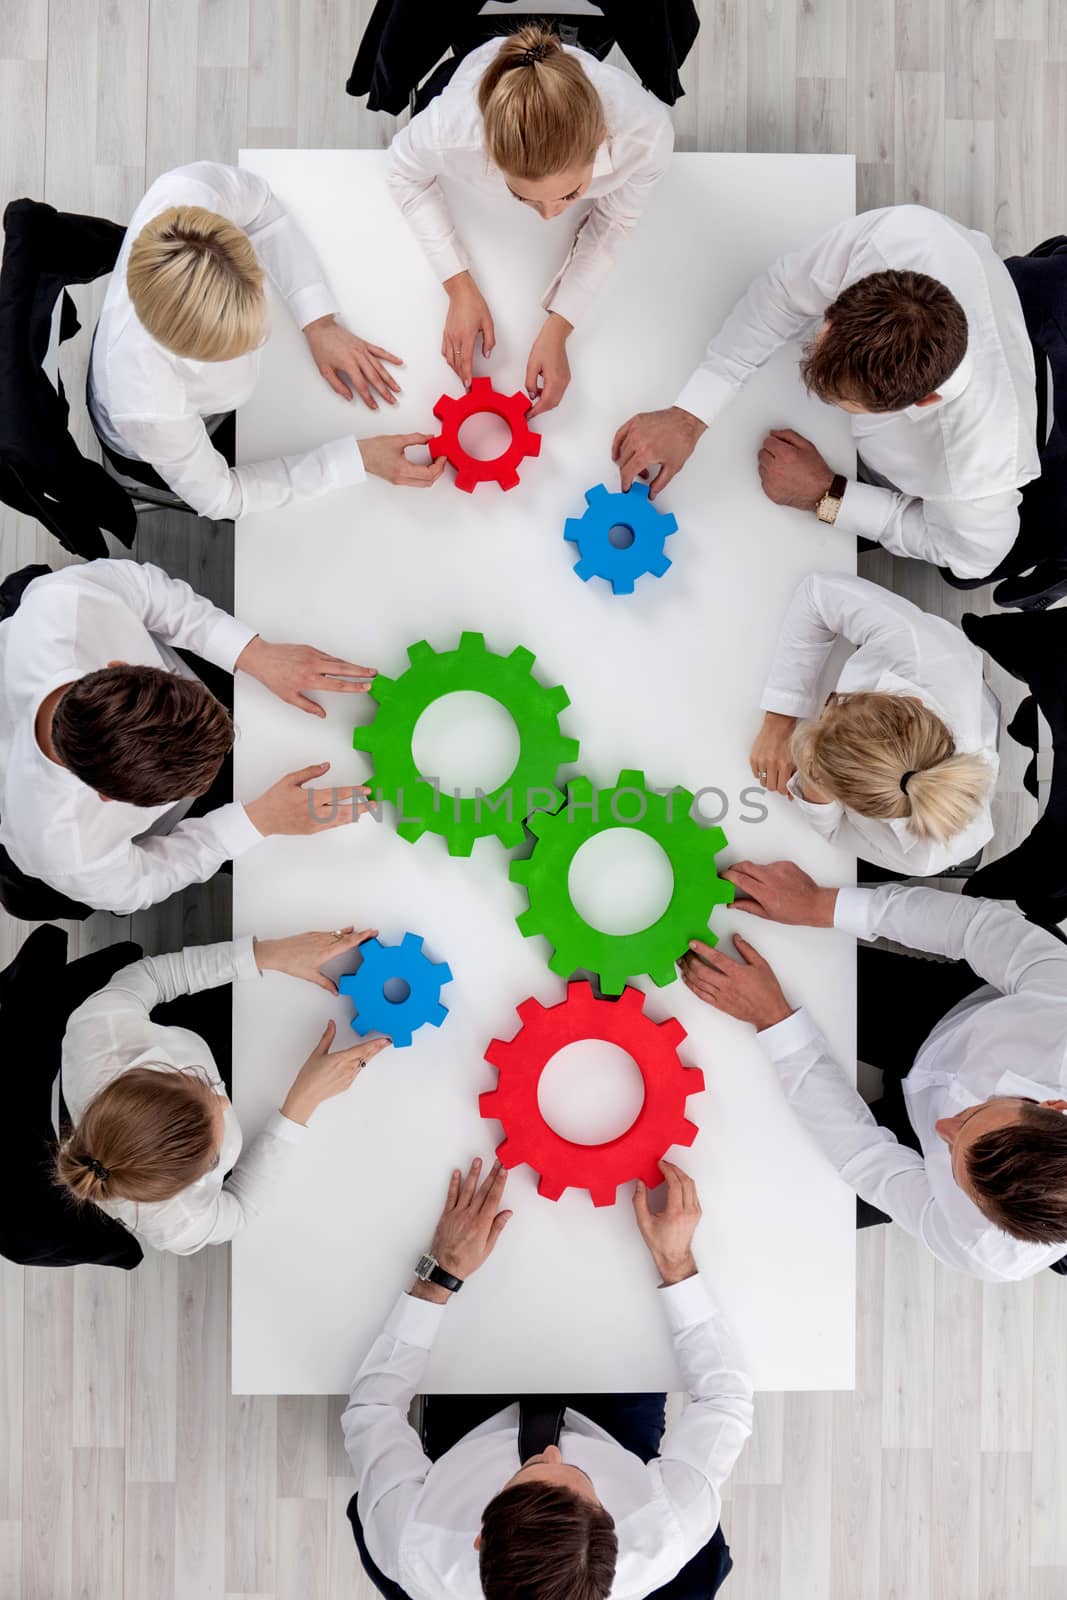 Teamwork with cogs of business by ALotOfPeople